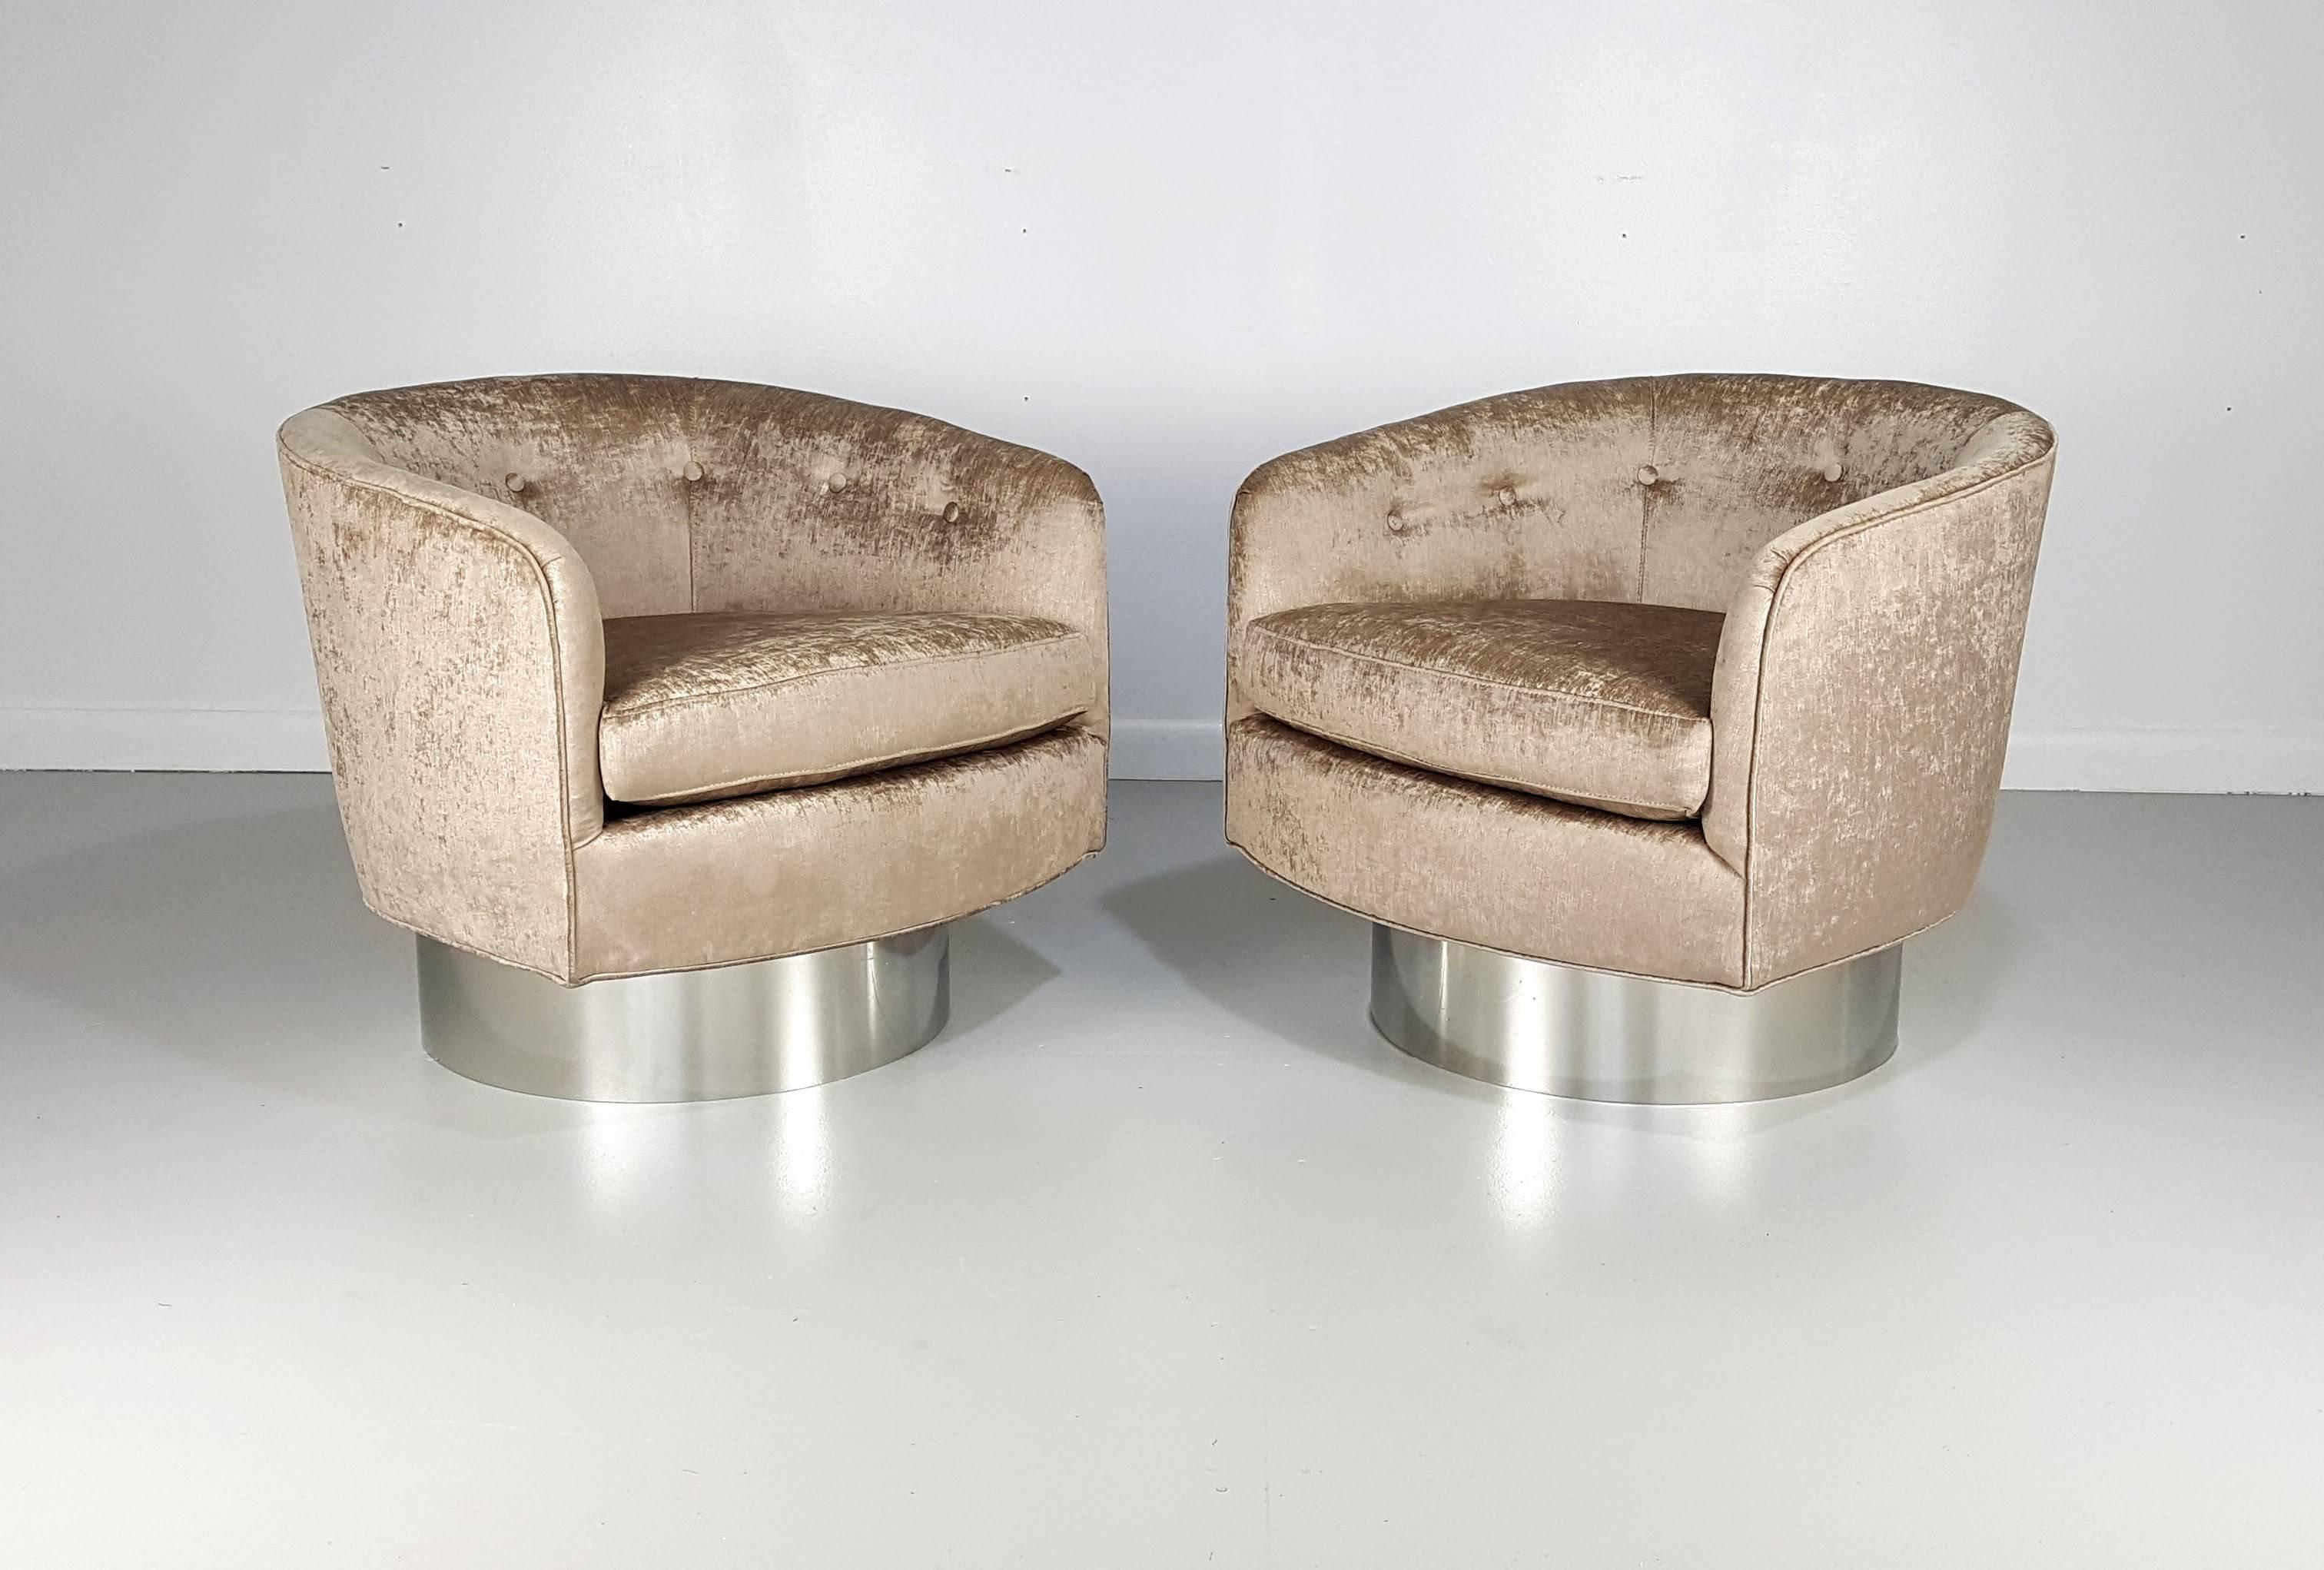 Swivel lounge chairs in velvet with chrome bases in the style of Milo Baughman's tub chairs. These chairs are designed and manufactured by Refine Limited. The frames are made from the highest quality materials by Pennsylvania Dutch craftsmen. They